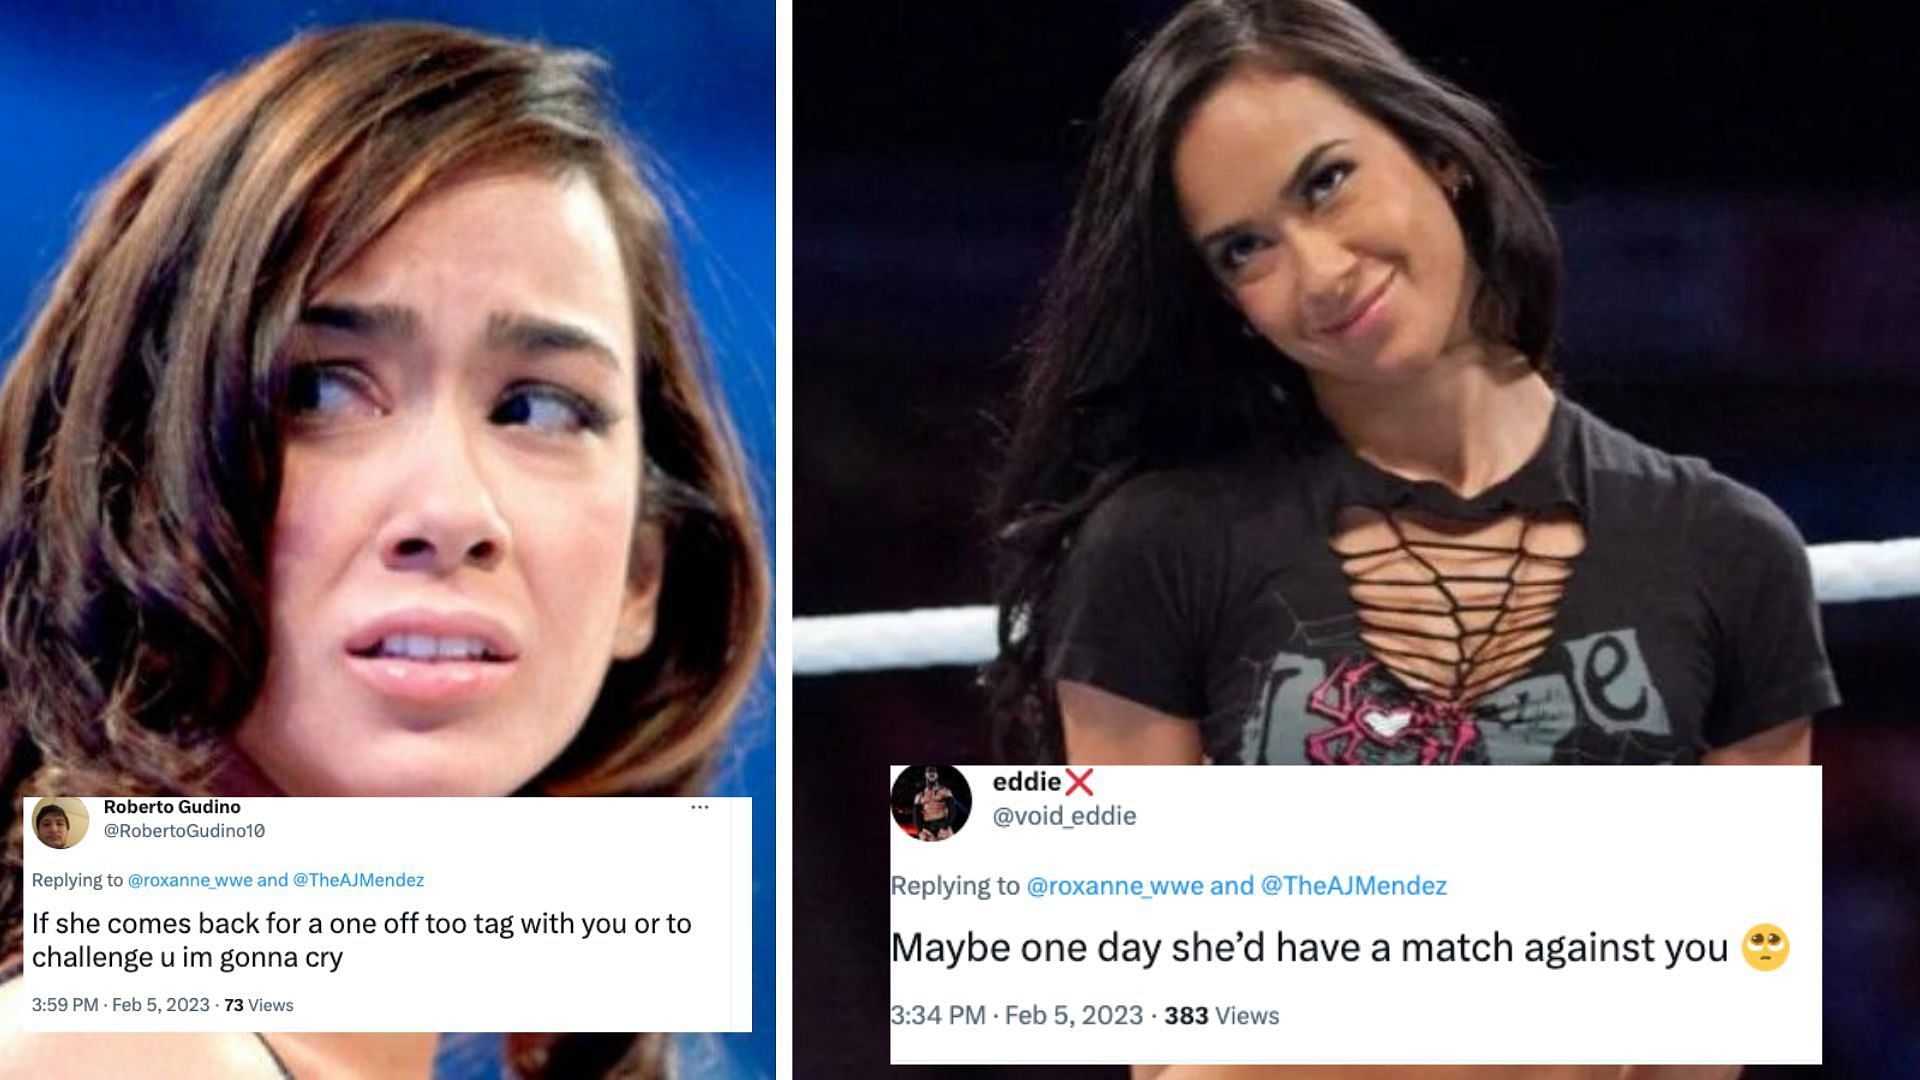 A current champion referenced WWE legend AJ Lee today.